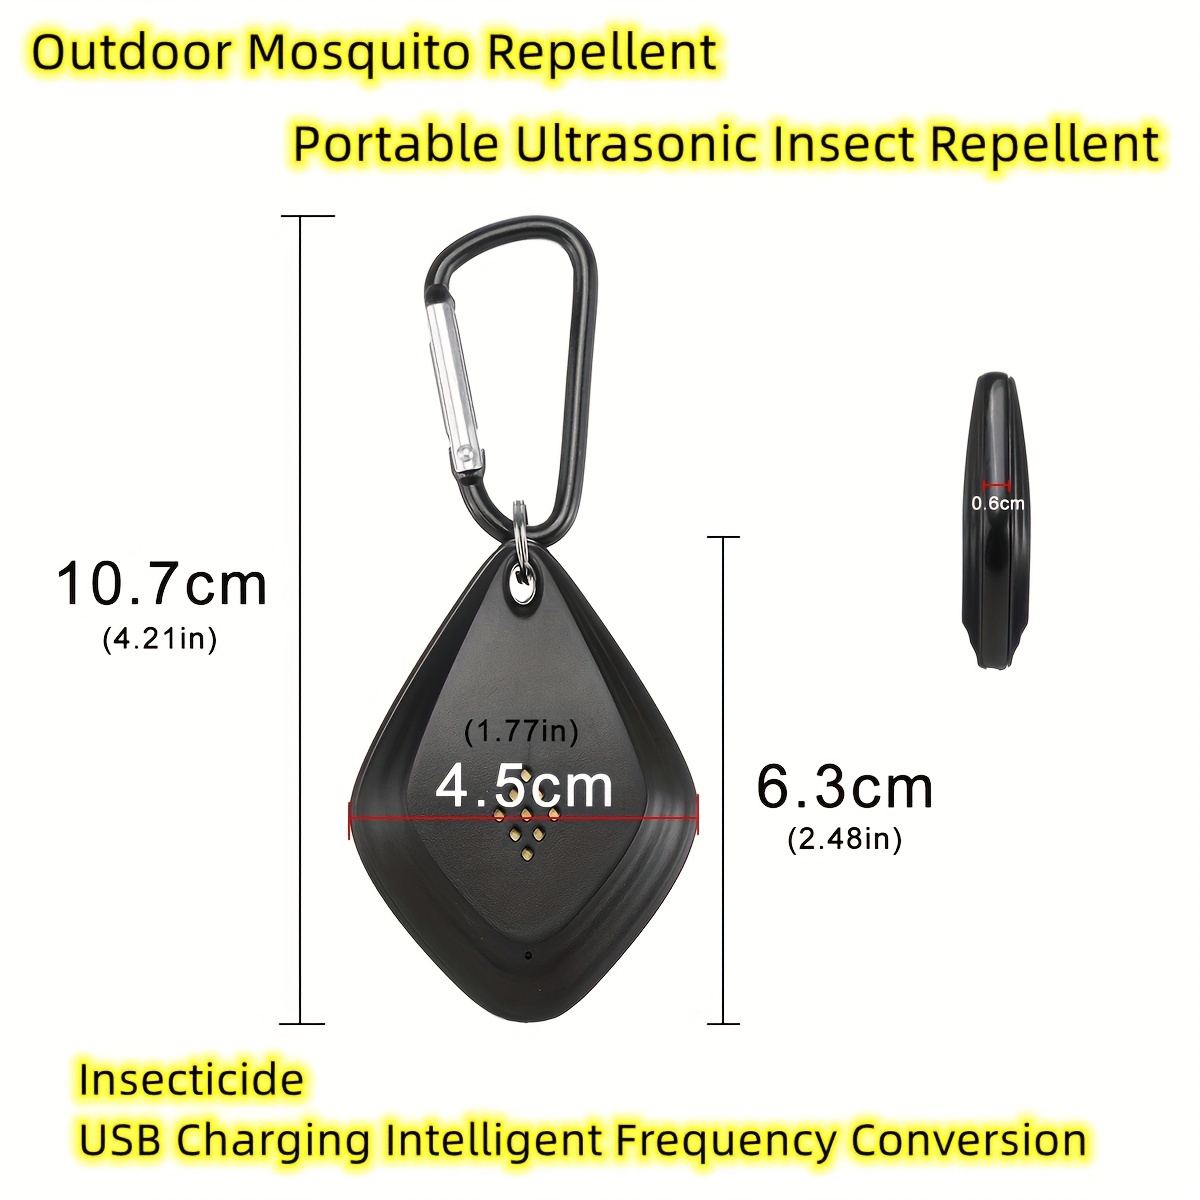 Intelligent Frequency Conversion Ultrasonic Mouse Repeller